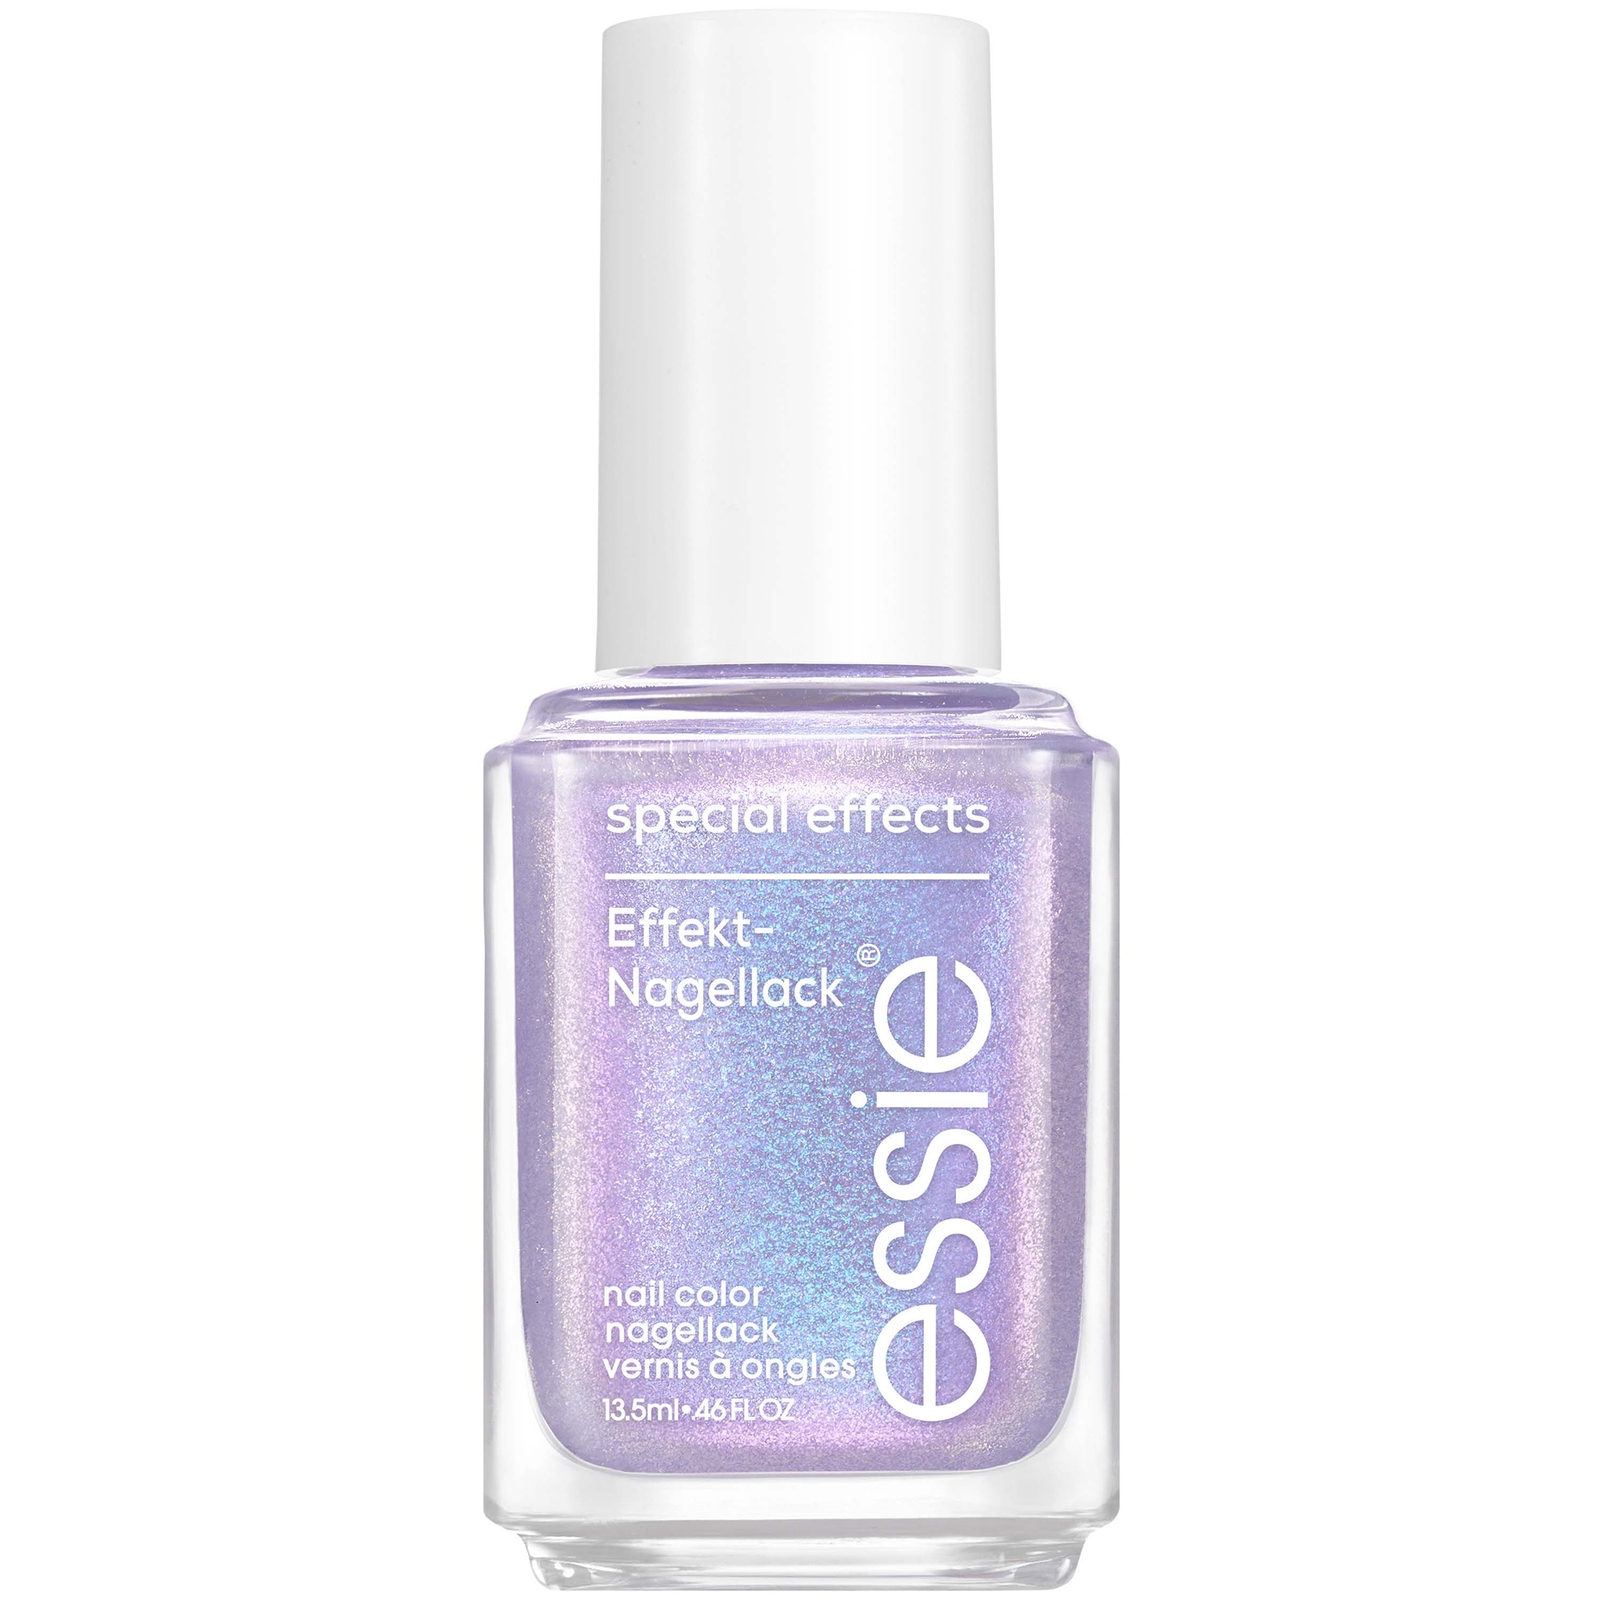 Essie Original Nail Art Studio Special Effects Nail Polish Topcoat 13.5ml (various Shades) - Ethereal Esca In Ethereal Escape